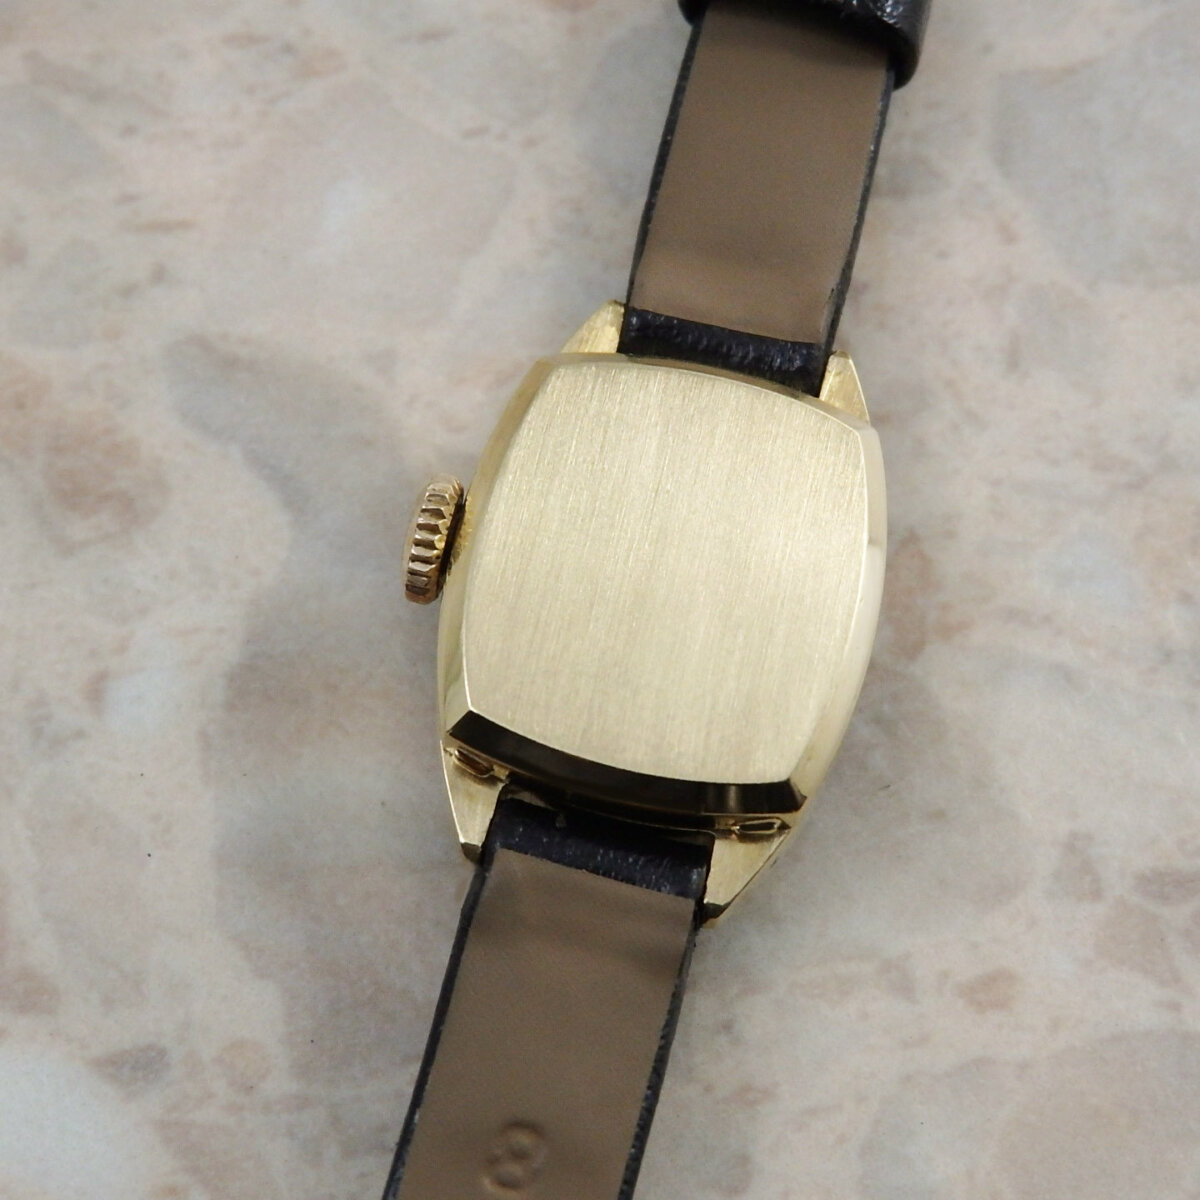 TIFFANY & CO. Vintage 1970's Automatic Skeleton 18K Yellow Gold Watch w/  Date - $20K Appraisal Value! ✓